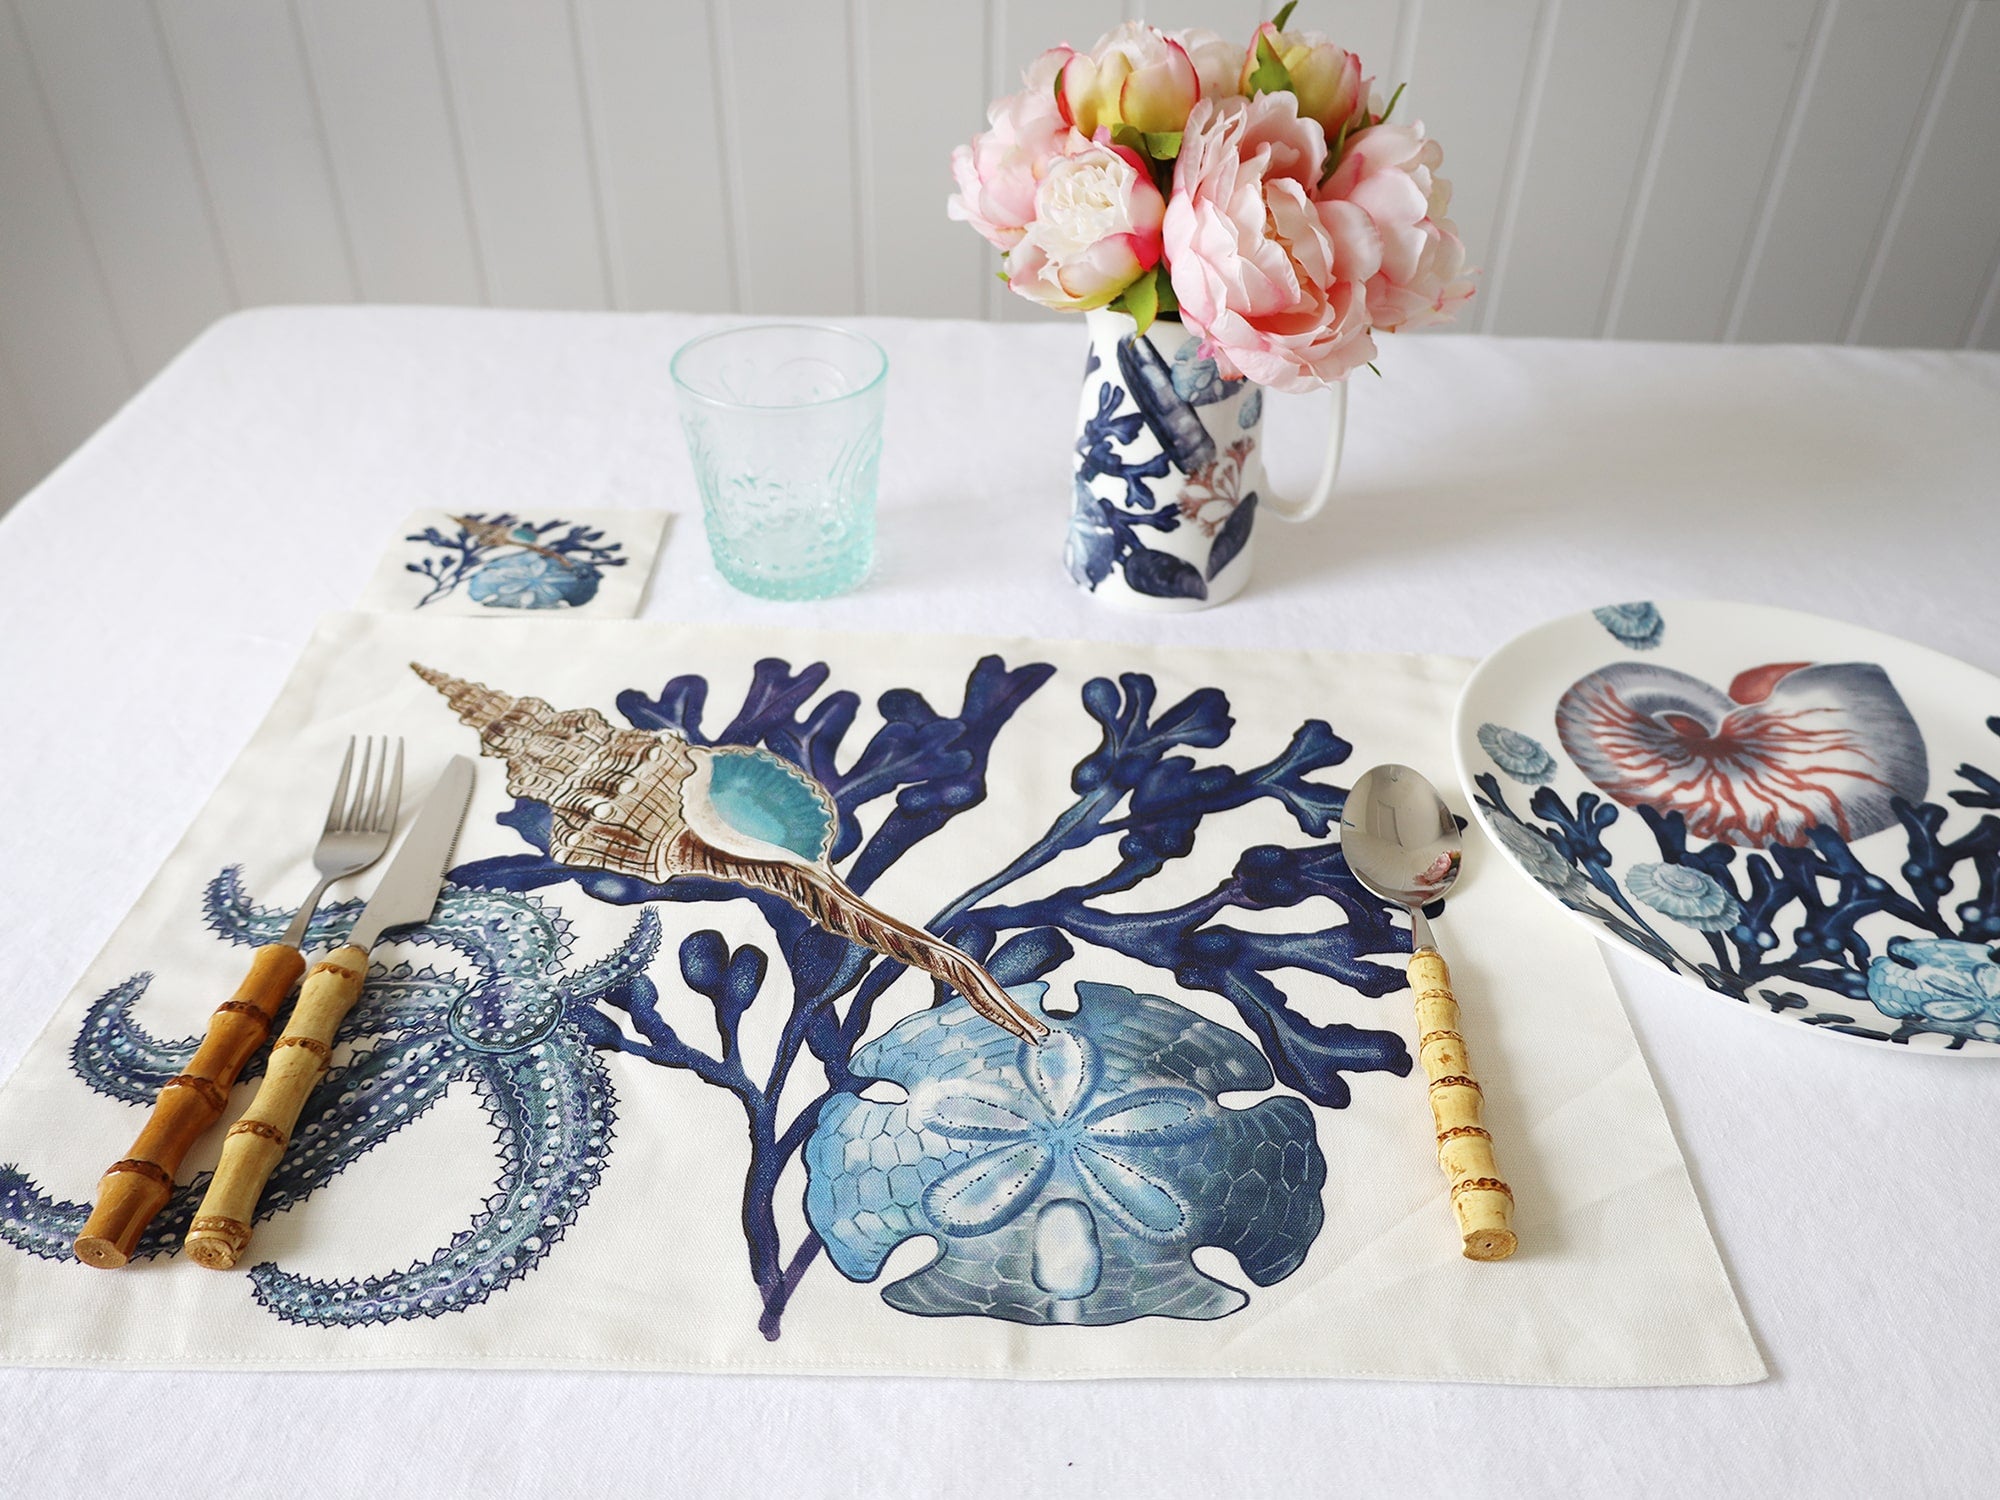 Fabric coaster in our Beachcomber design placed next to a matching placemat on a tablecloth.Also you can see bamboo cutlery,A vase of flowers and a beachcomber bowl and a glass